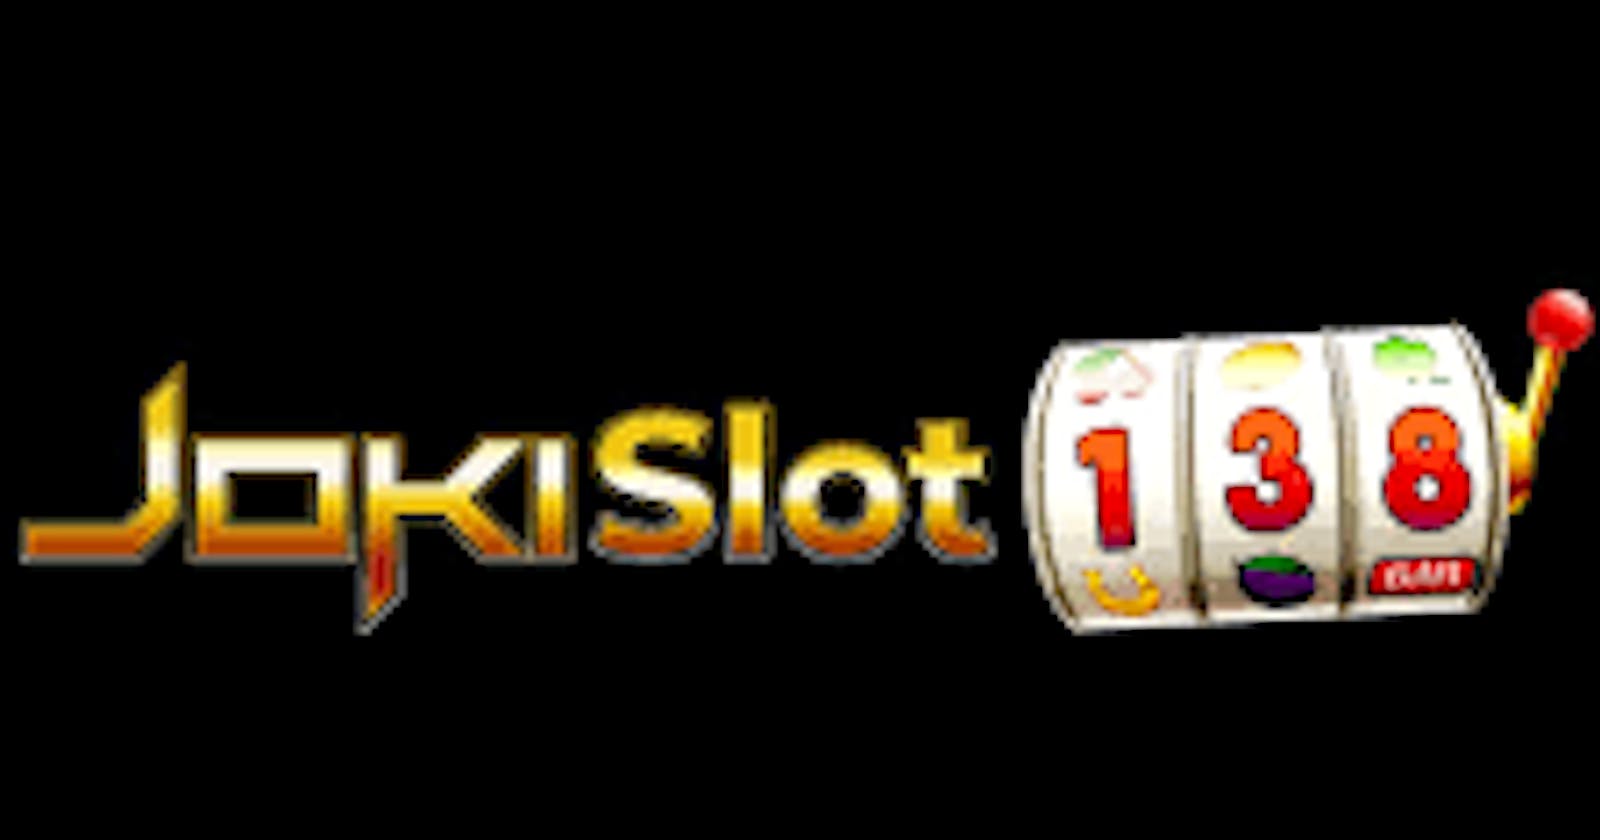 "JOKISLOT138: Winning Spins in the Game of Sports"